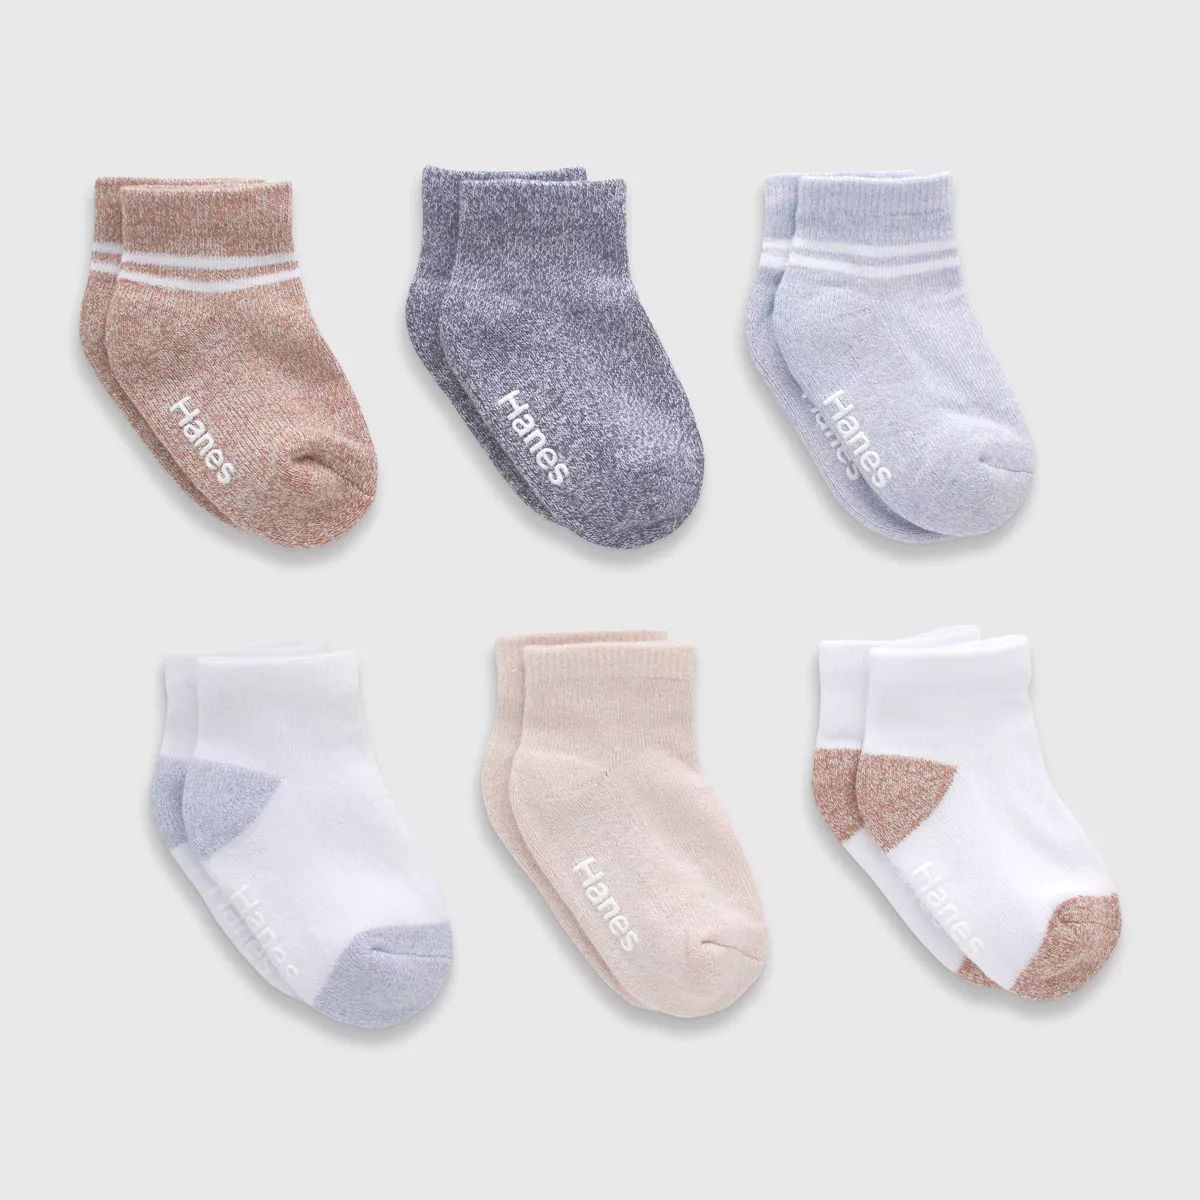 Hanes Toddler Boys' 6pk PURE Comfort with Organic Cotton Solid Ankle Socks - White/Gray | Target